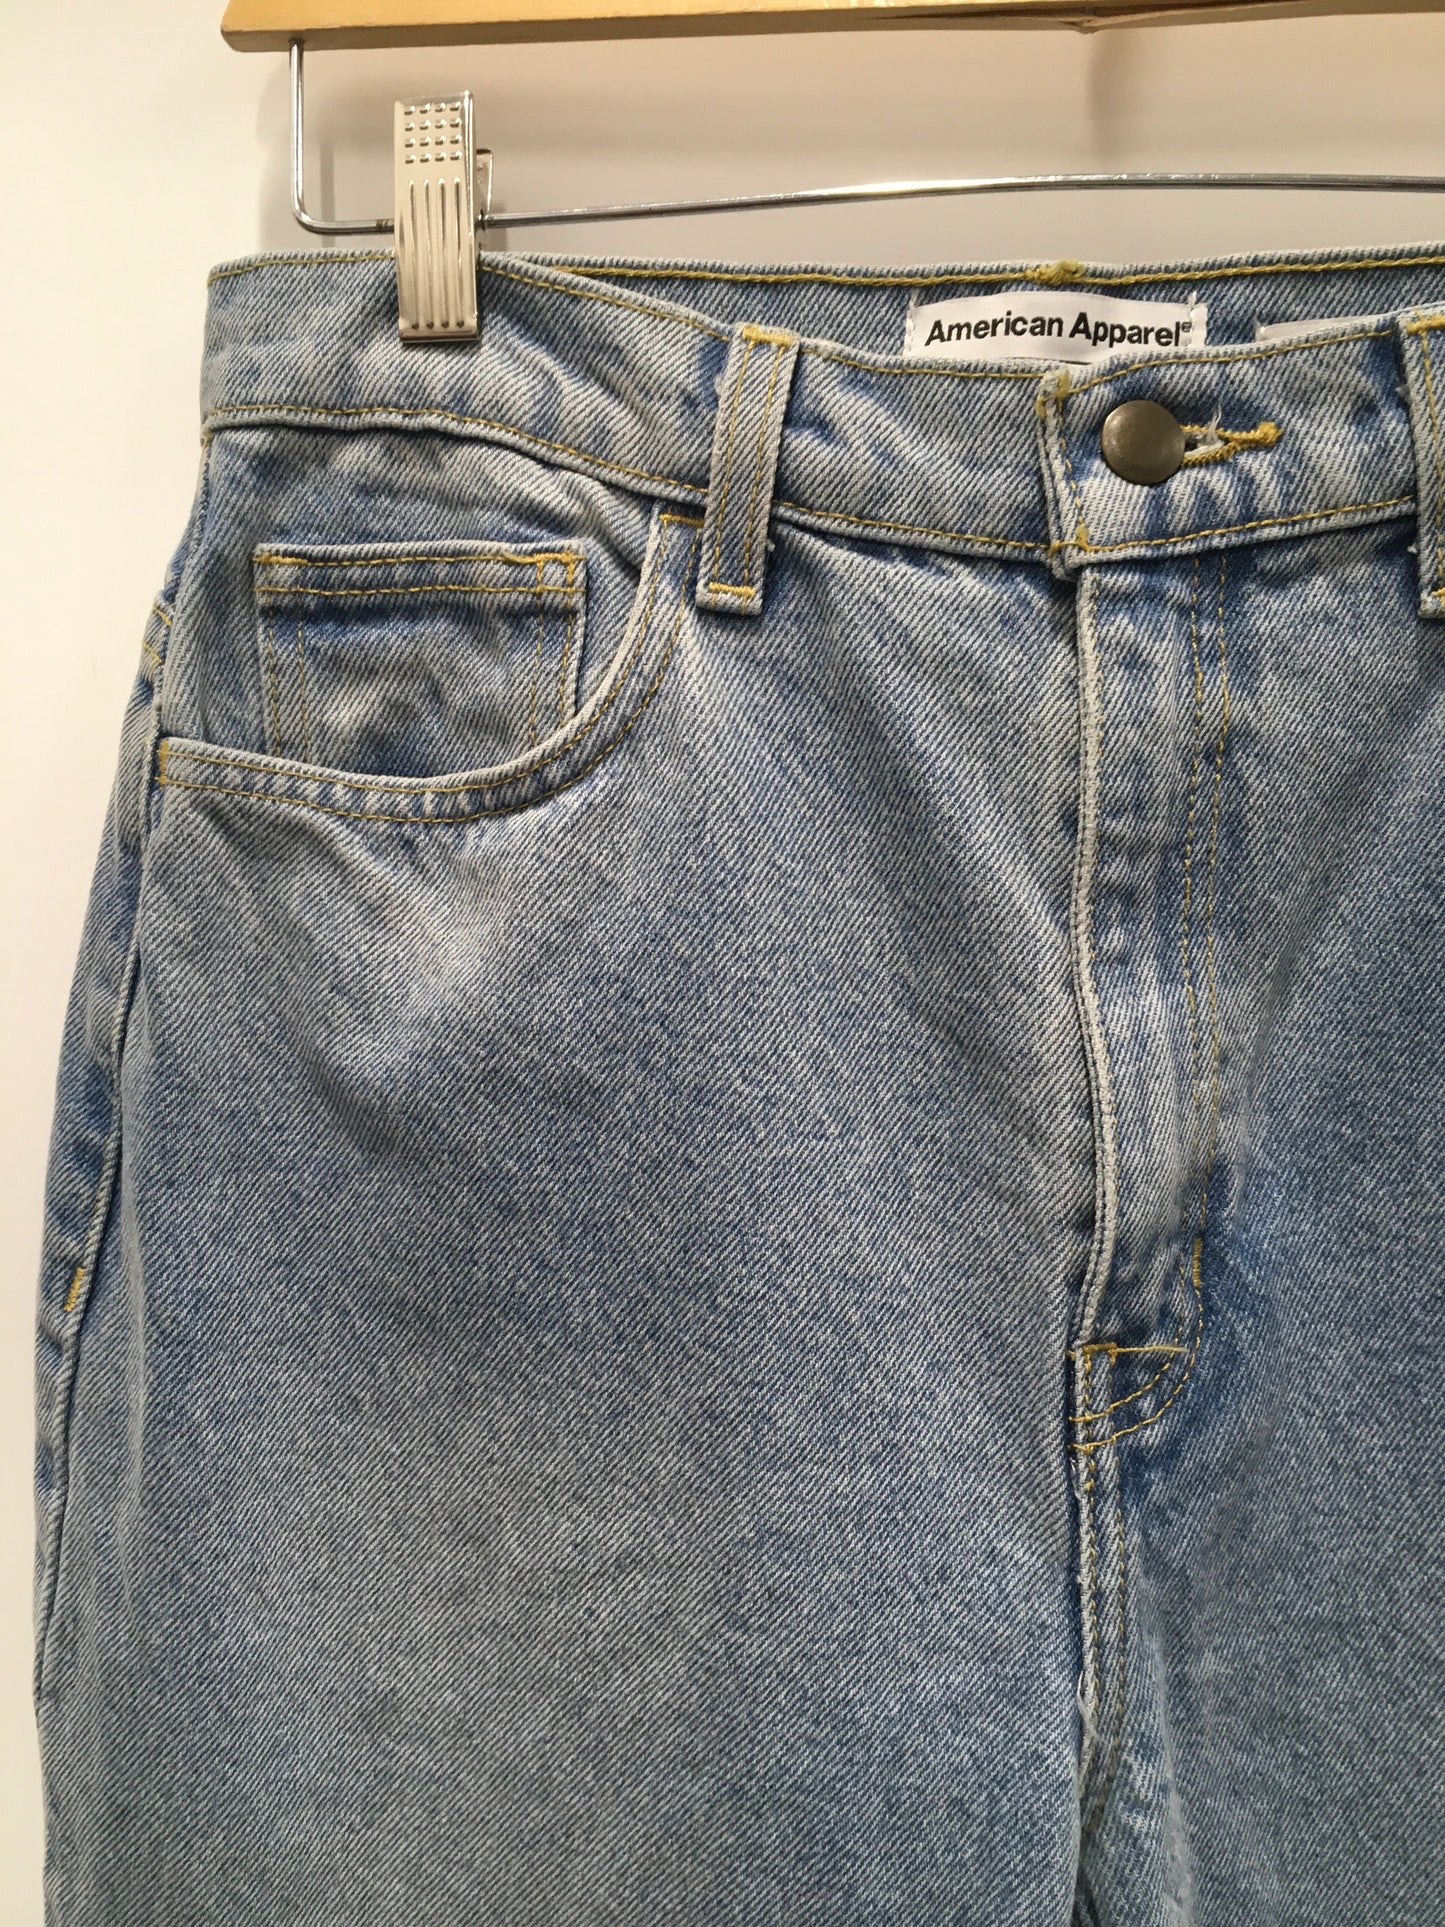 Jeans Relaxed/boyfriend By American Apparel  Size: 8